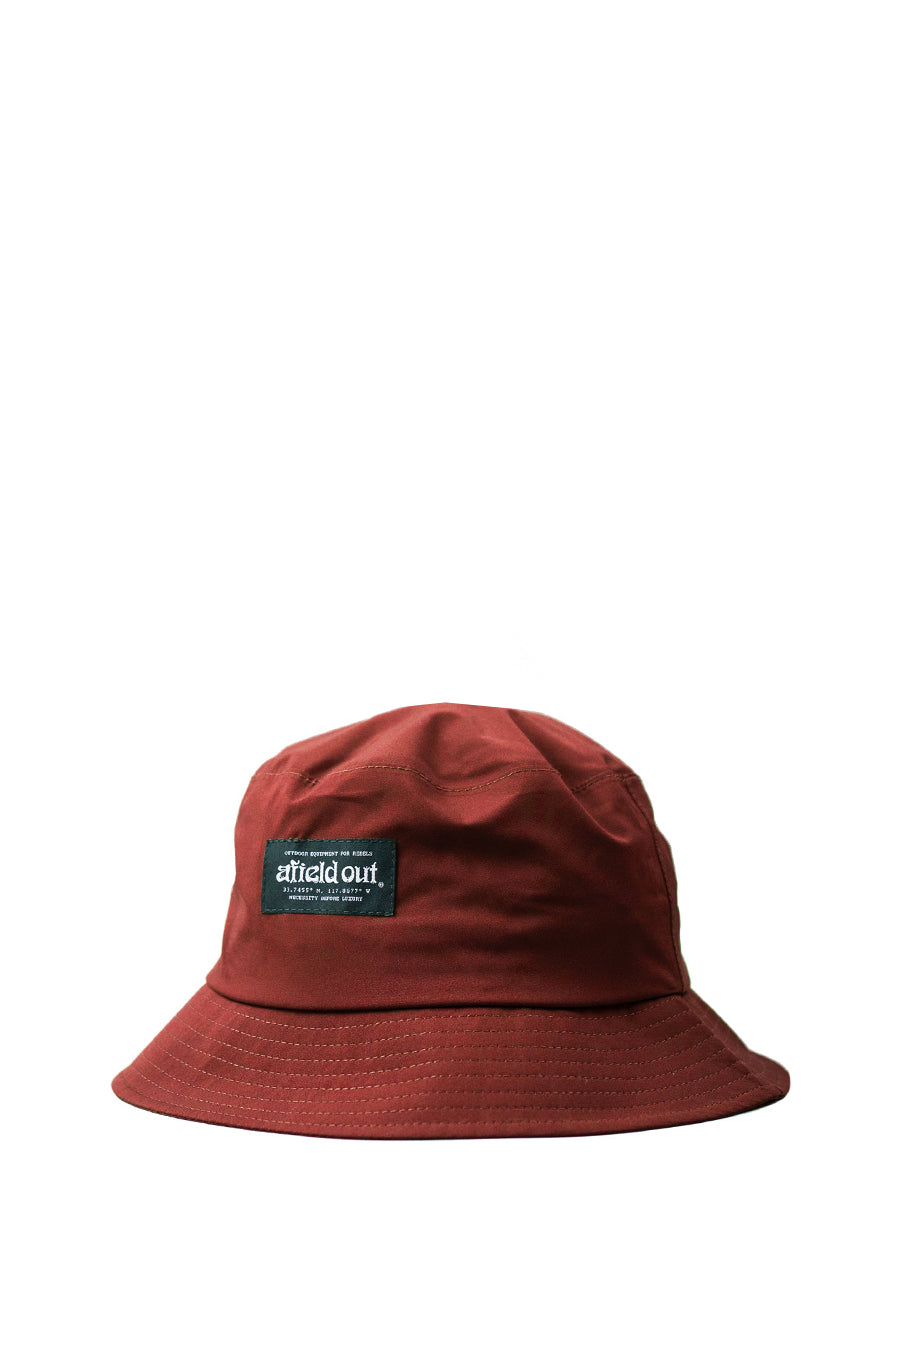 AFIELD OUT DARBY BUCKET HAT RED